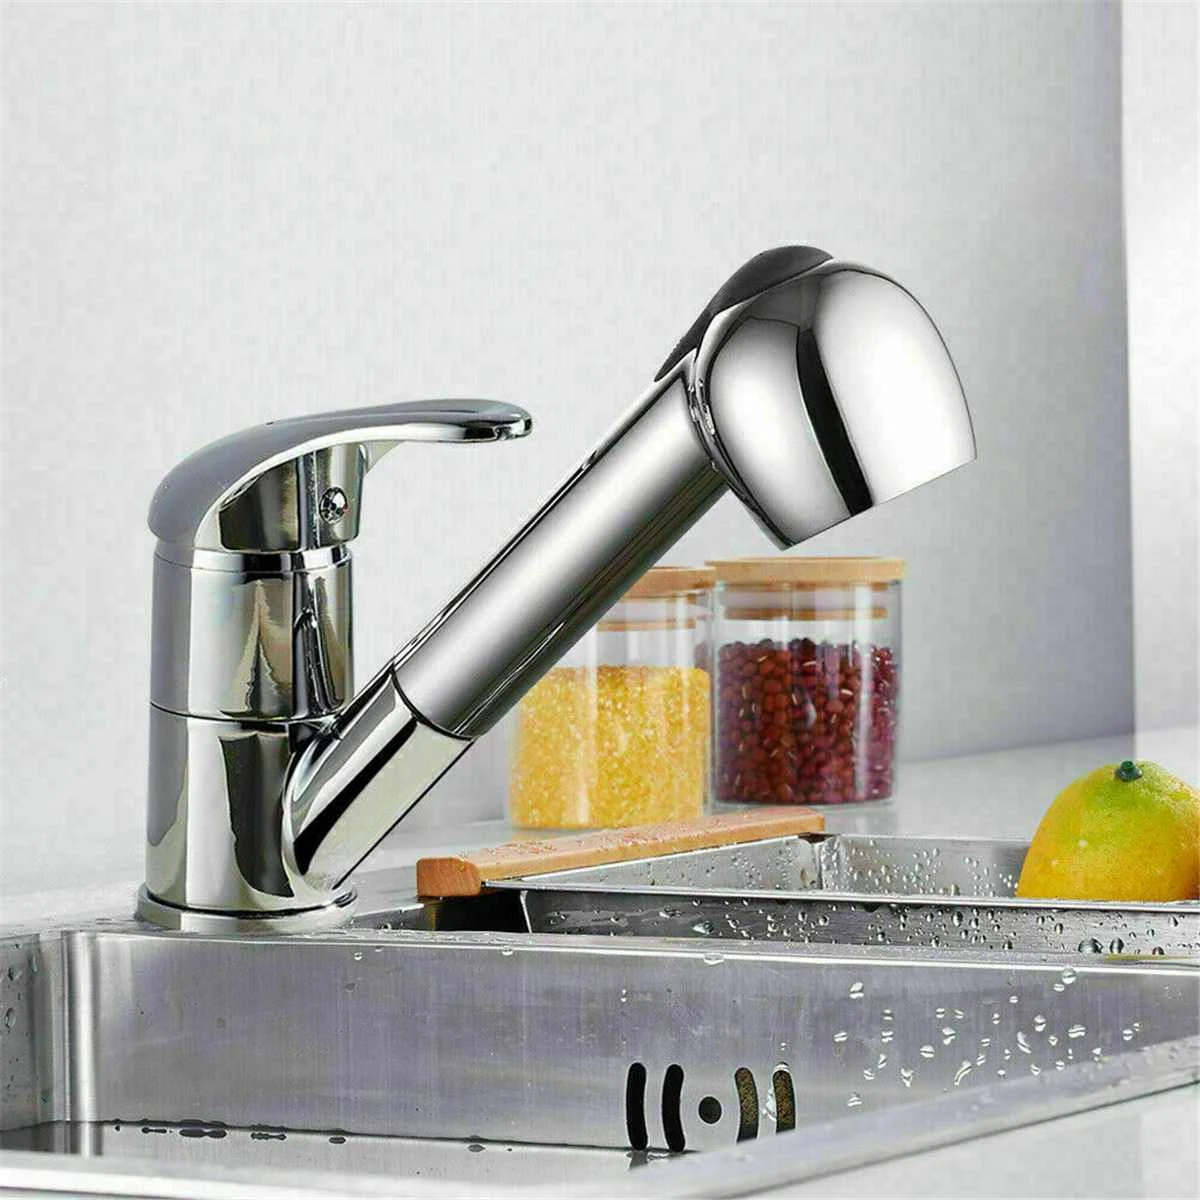 Kitchen Faucet Solid Brass Single Hole Pull Out Spout Kitchen Sink Mixer Tap Stream Sprayer Head Silver Hot Cold Tap Mixer white kitchen sink